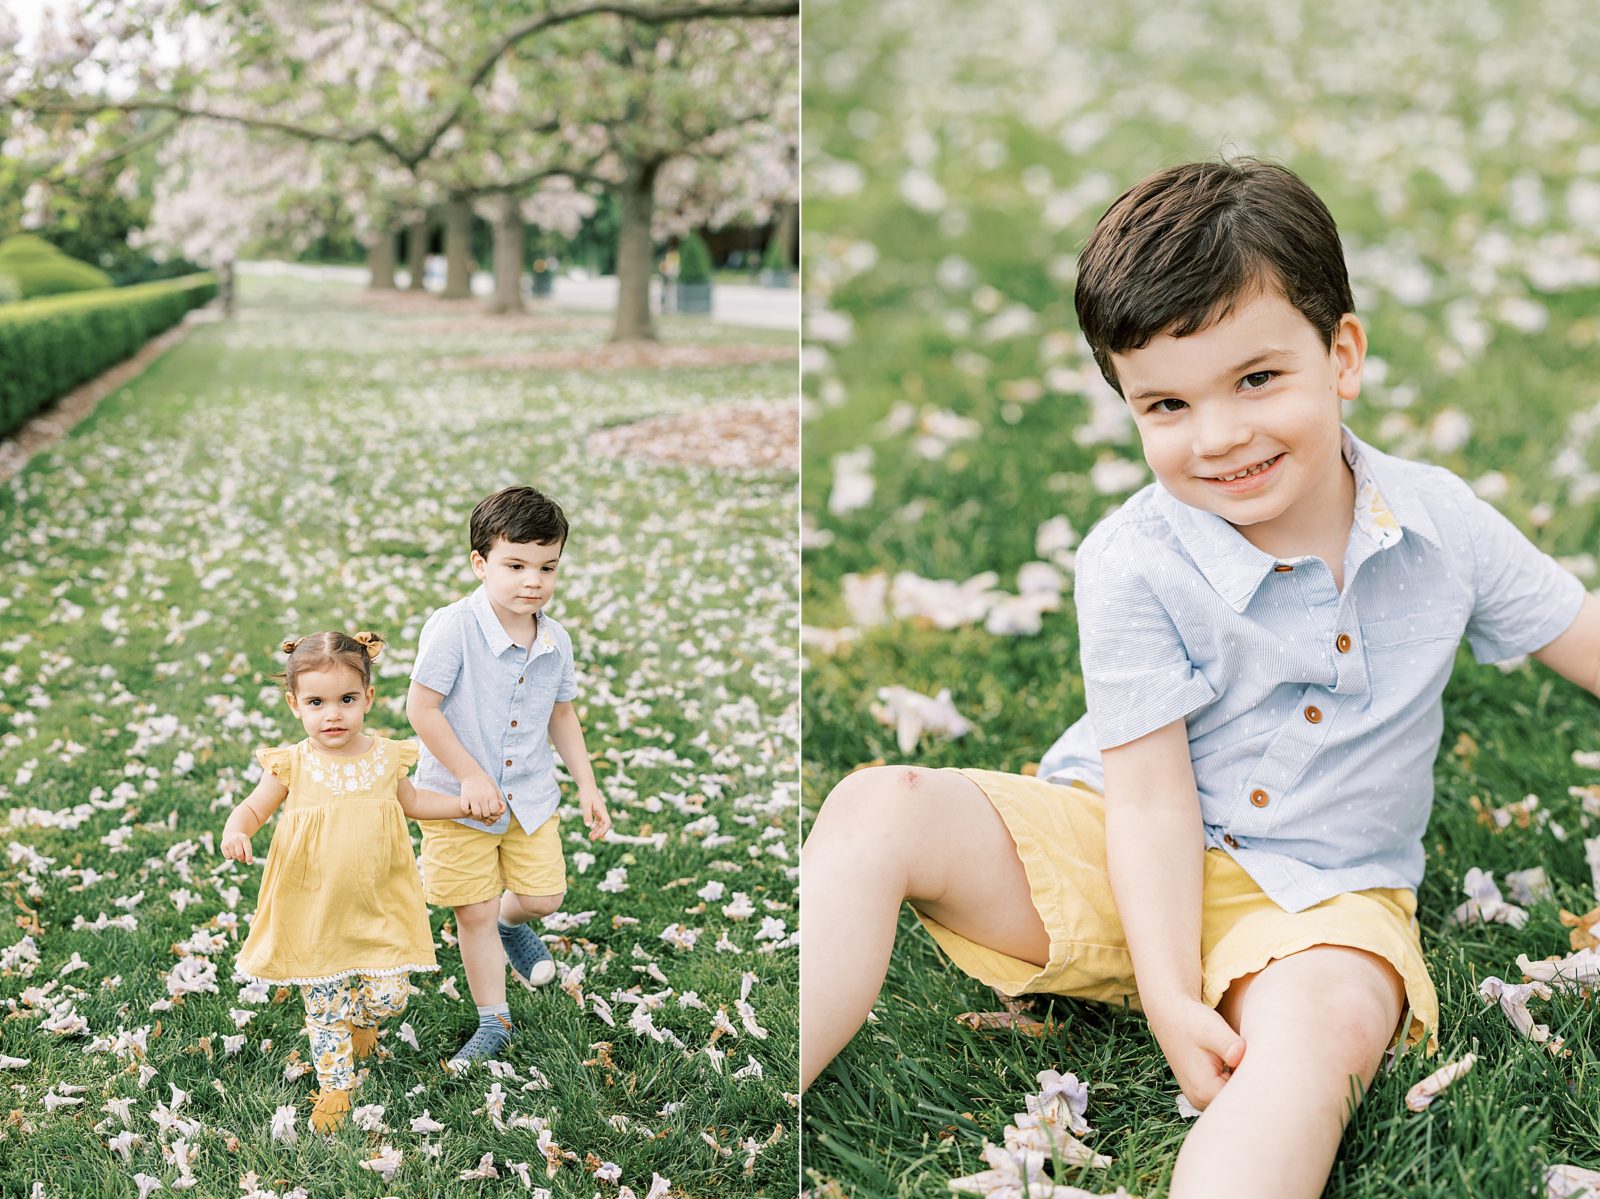 Le Papillon by Samantha Jay Photography gives 3 tips for dressing your family cohesively for a family portrait session in Media Pennsylvania